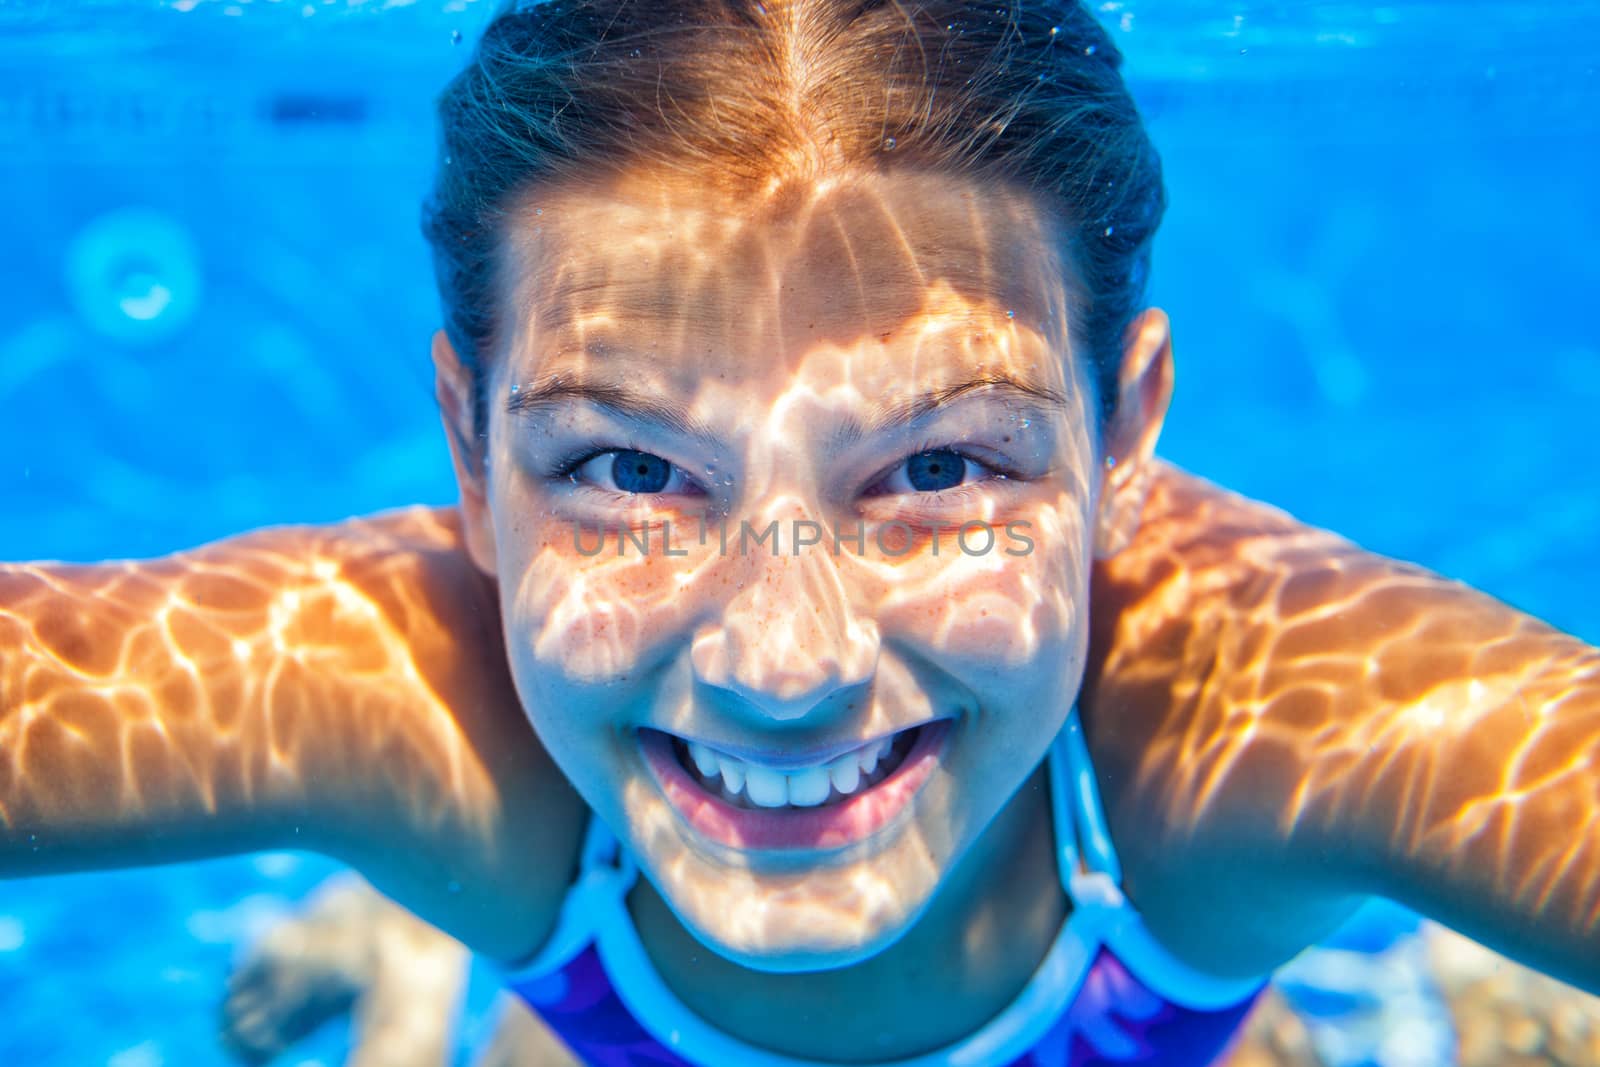 Close-up portrait of underwater happy cute girl in swimming pool